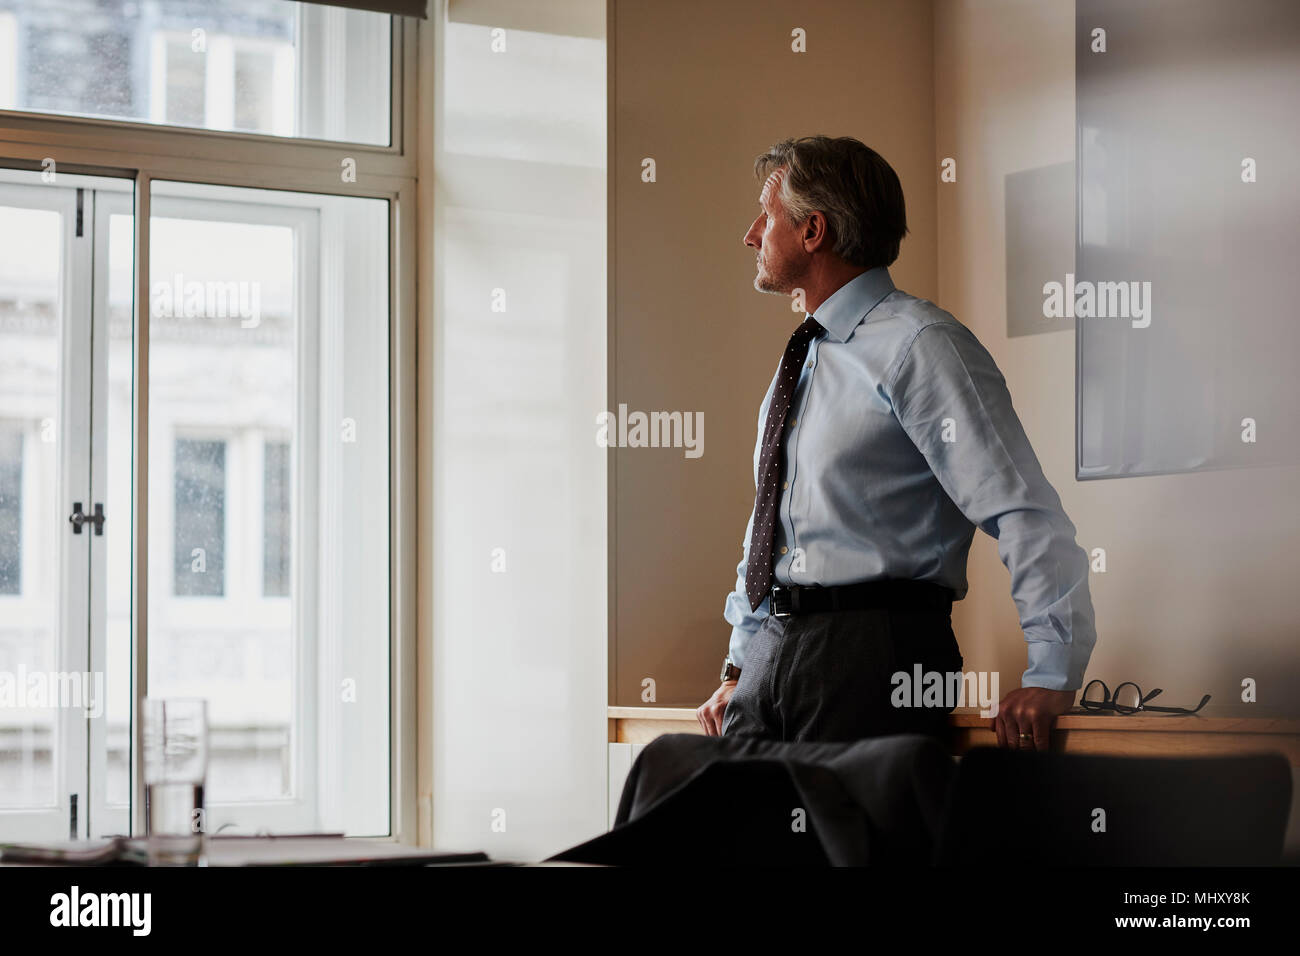 Businessman in office looking out of window pensively Stock Photo